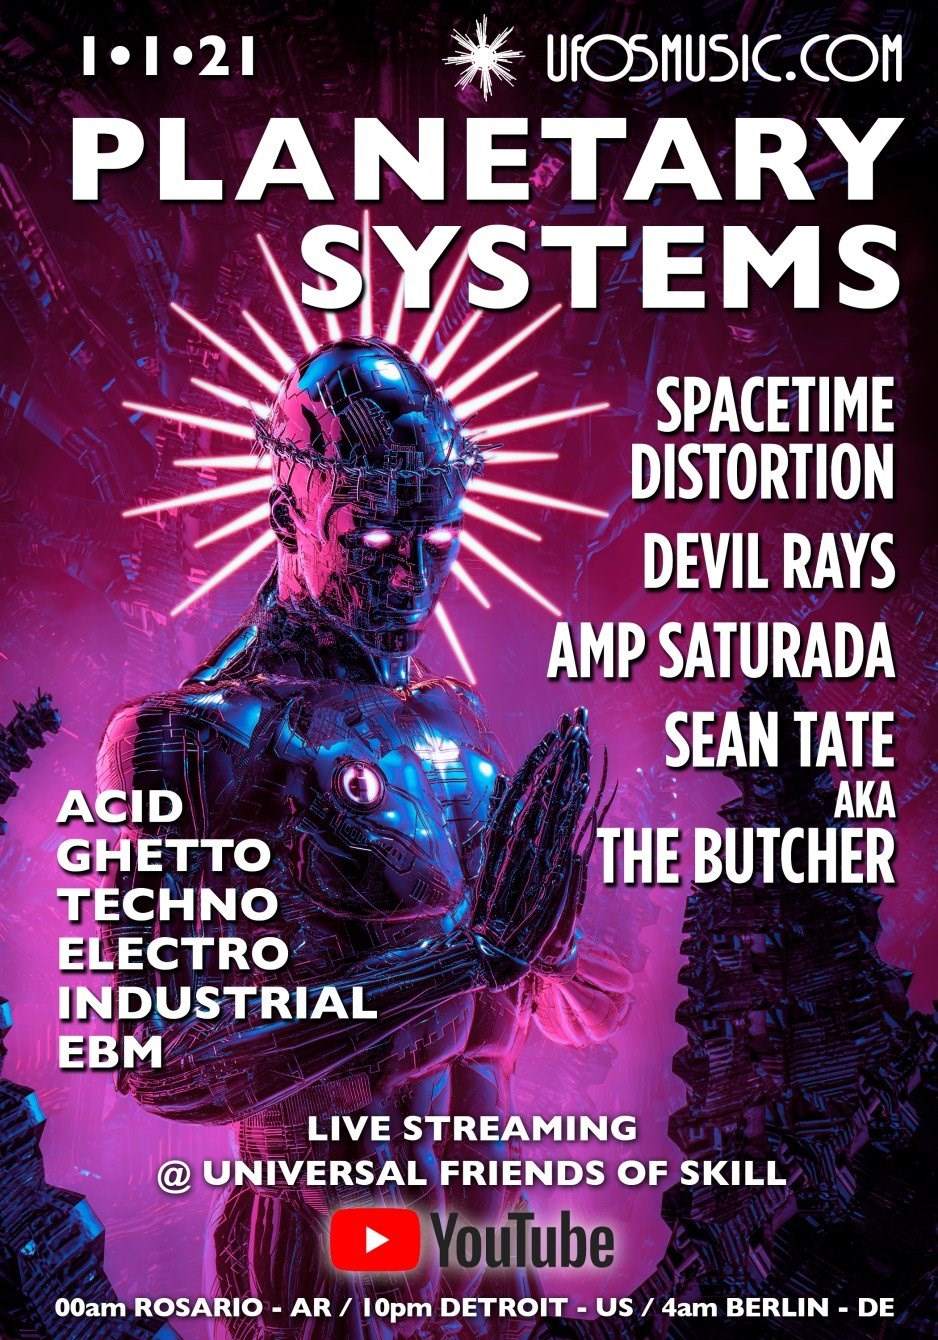 2021 Planetary Systems Live Streaming 02 - New Year's Night at The Booty Bar - Ufos Music - Página frontal